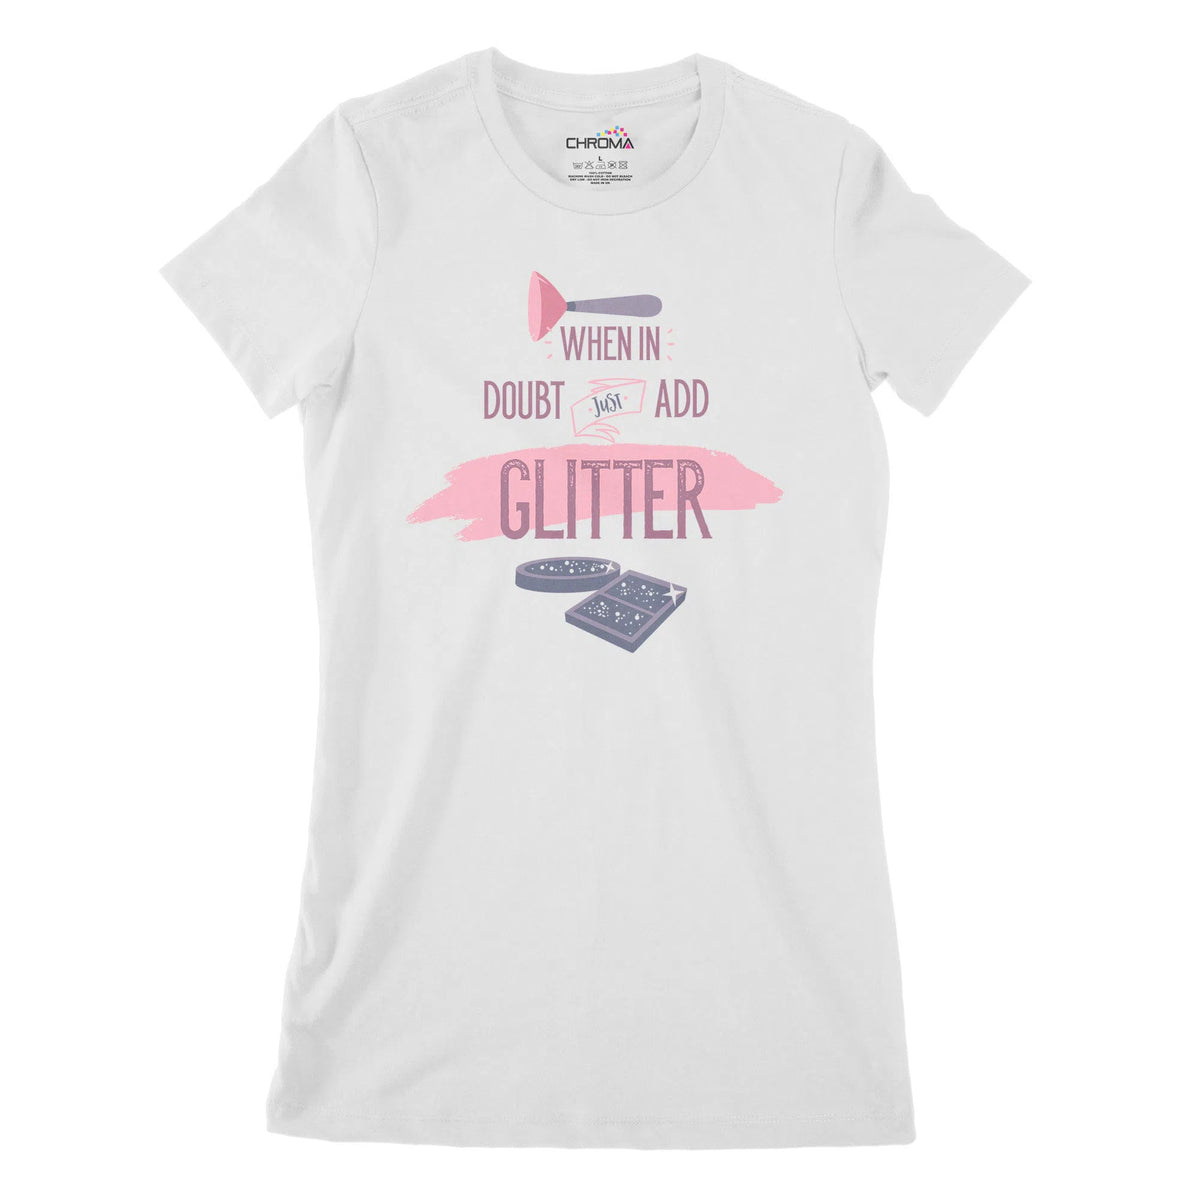 Add Glitter Women's Classic Fitted T-Shirt Chroma Clothing